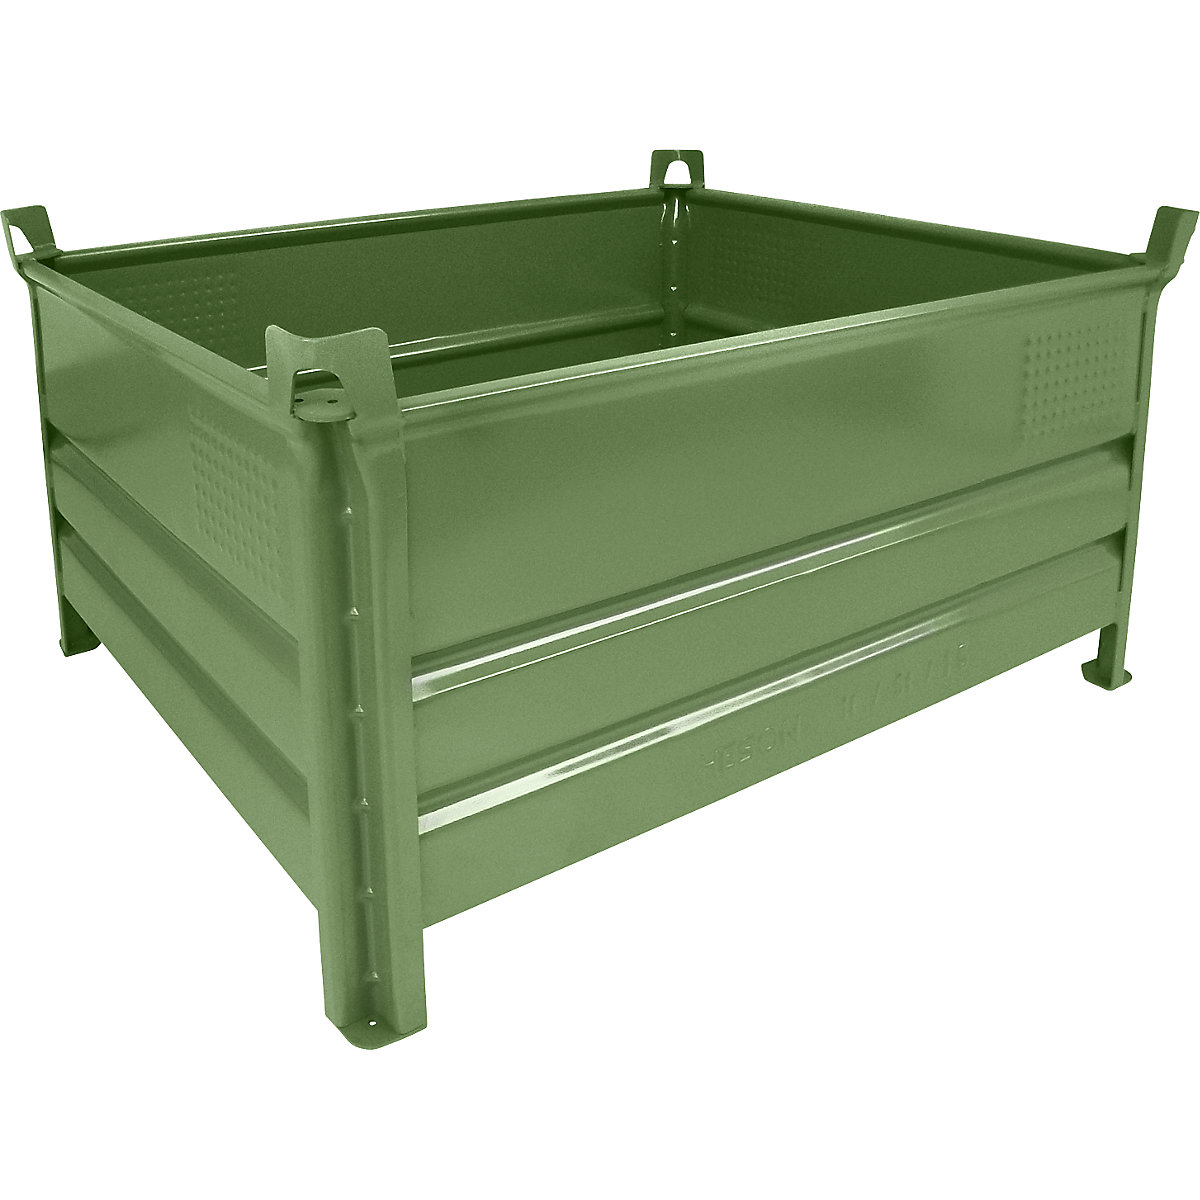 Solid panel box pallet – Heson, WxL 1000 x 1200 mm, max. load 2000 kg, green, 1+ items-5